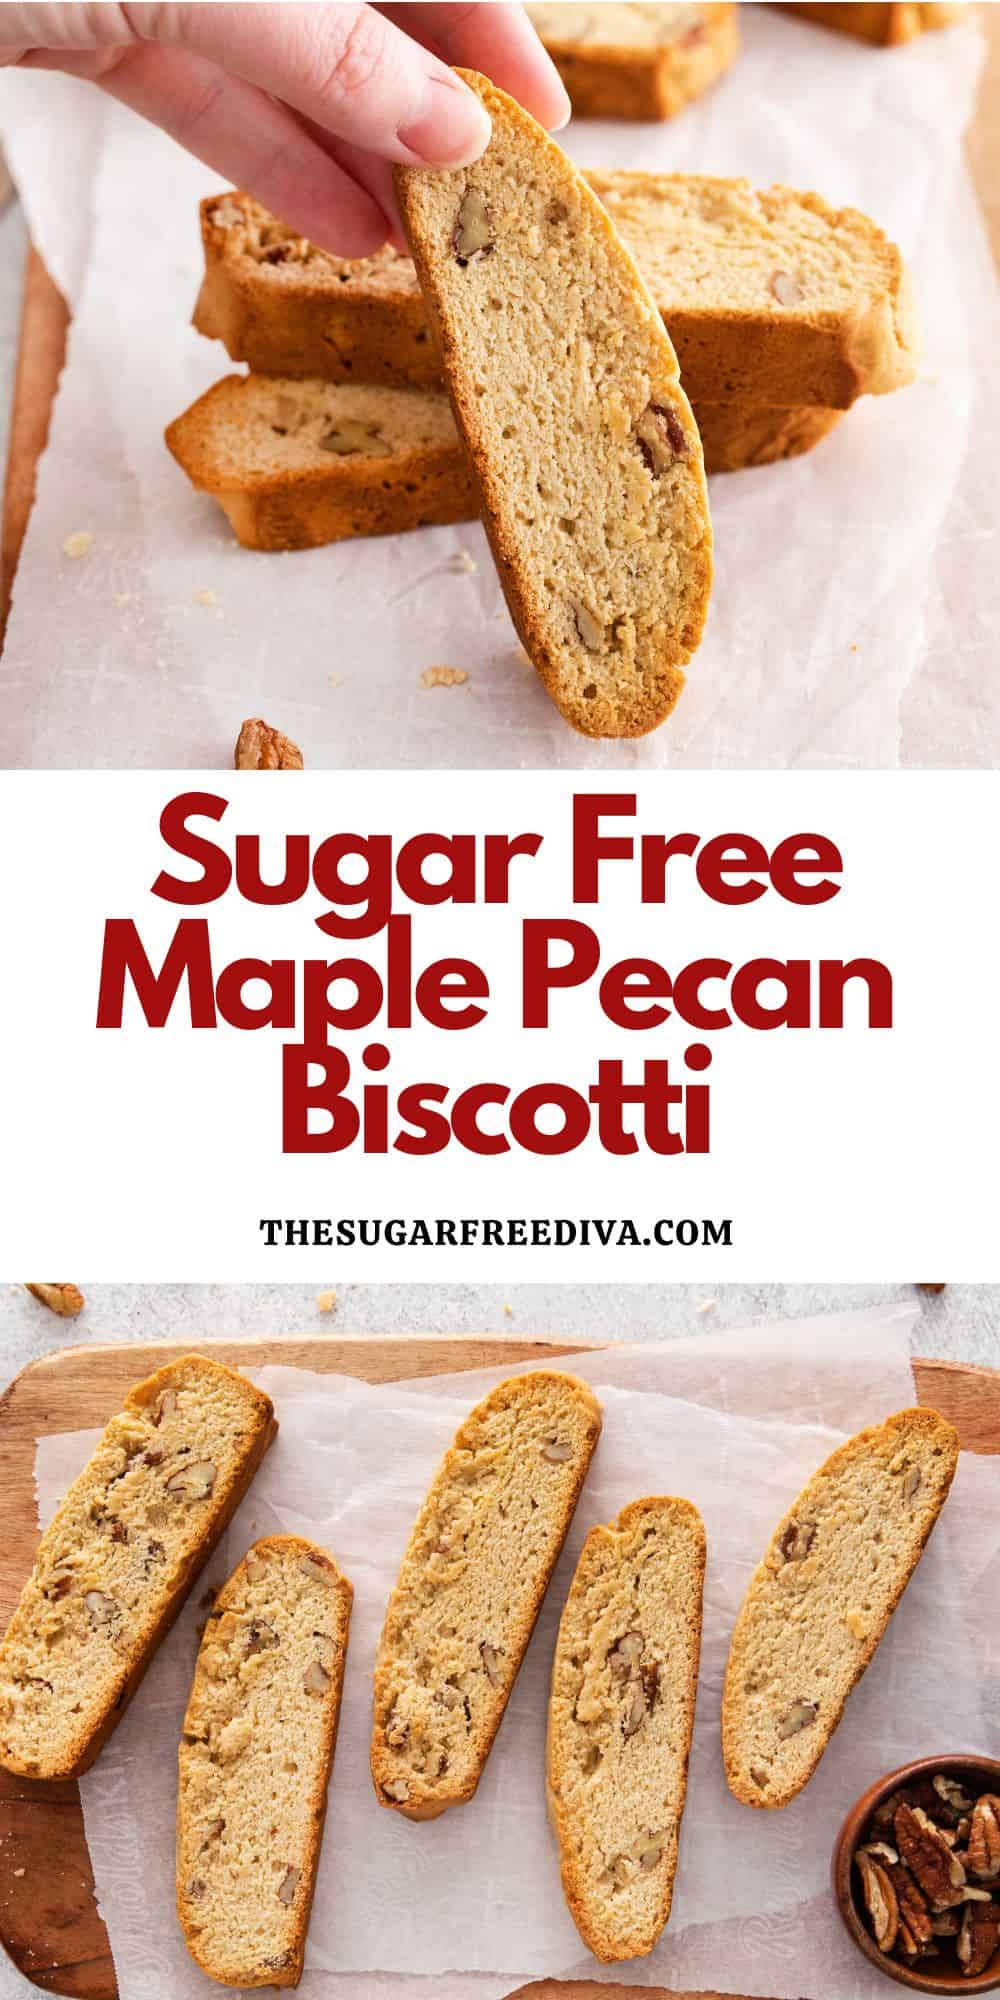 Sugar Free Maple Pecan Biscotti, a delicious no added sugar dessert recipe based upon a popular traditional Italian cookie.